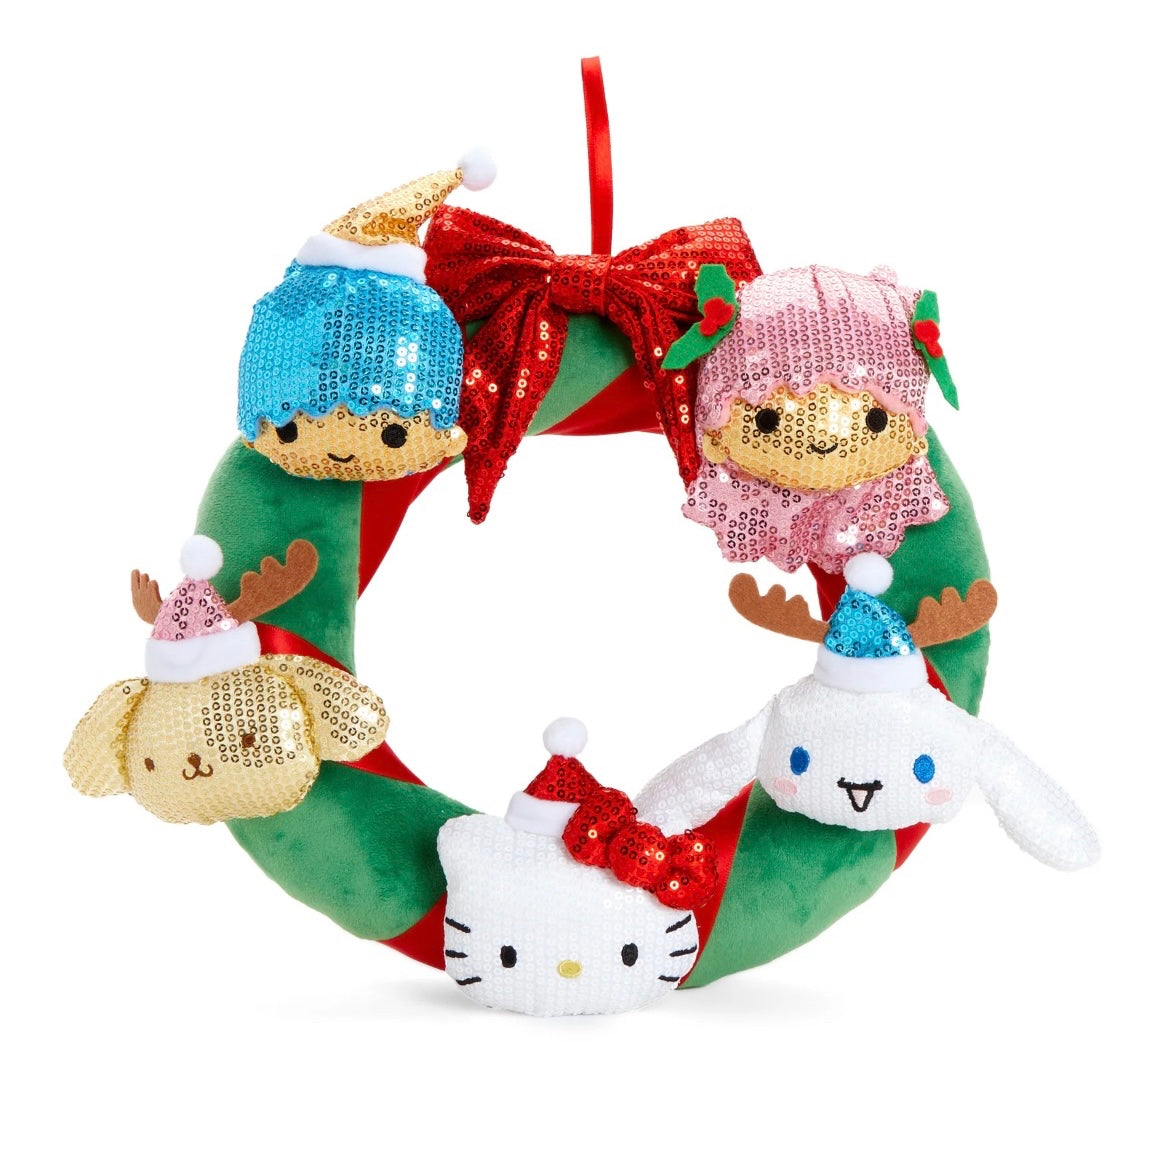 Holiday Sequin Hello Kitty
& Friends Wreath